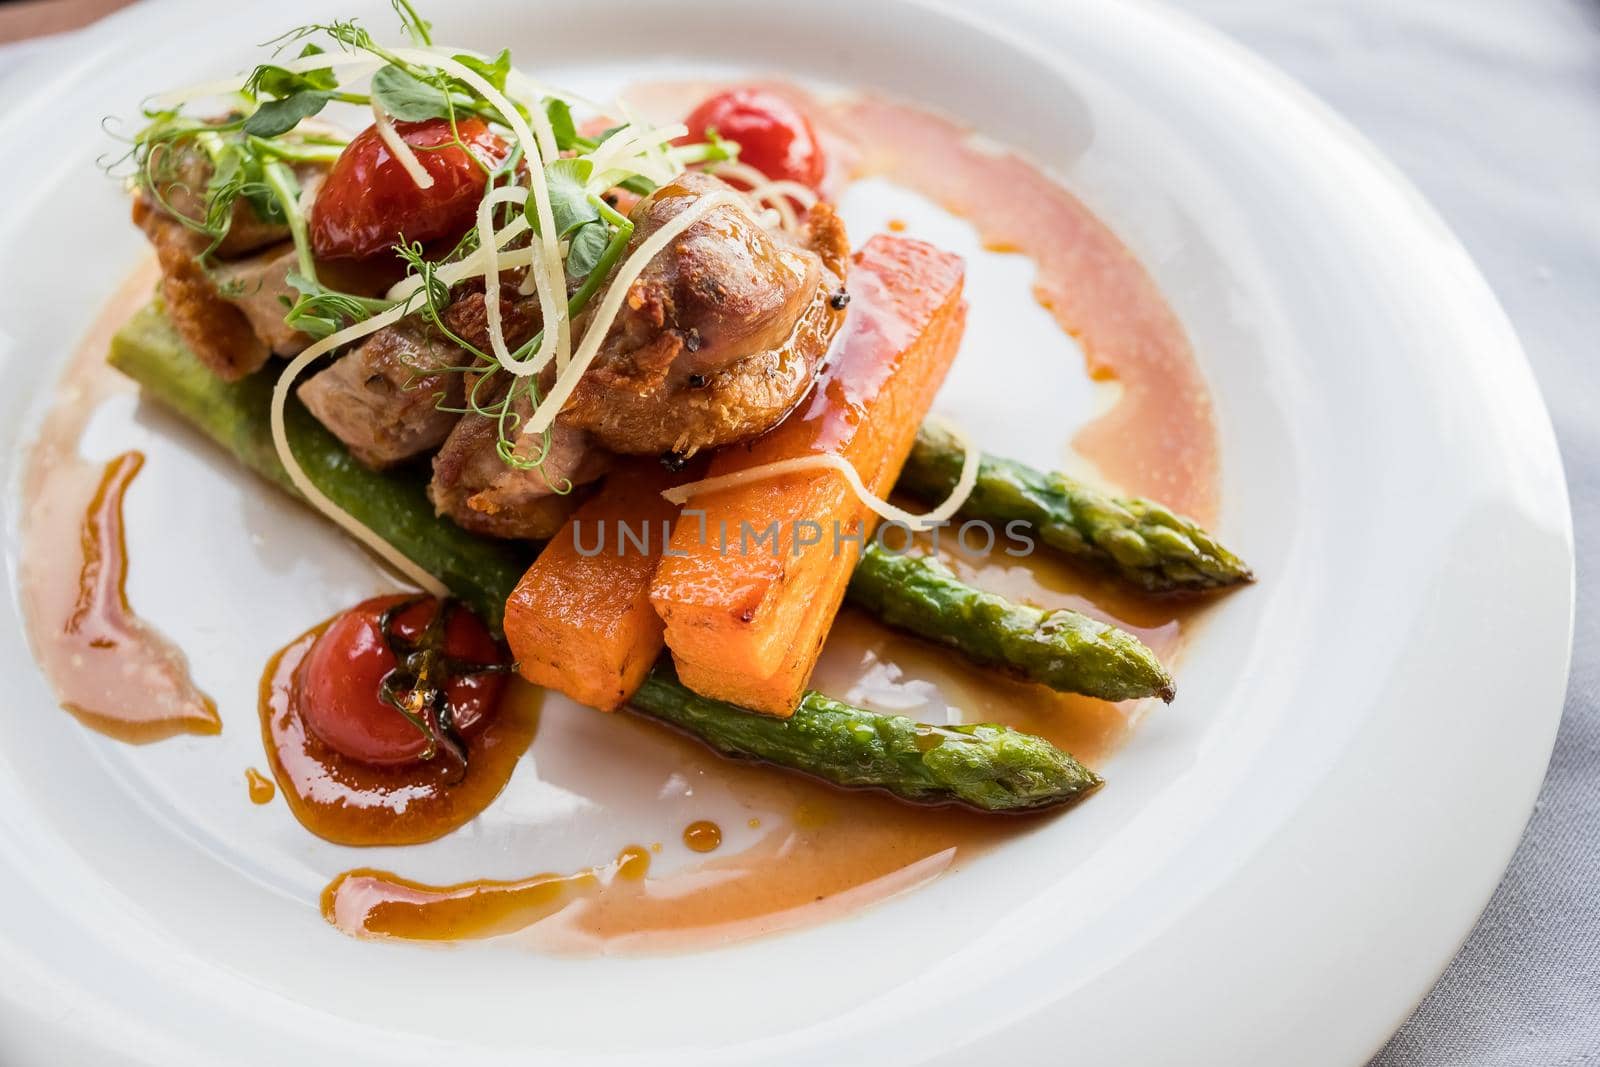 Roasted duck in slices with wine sauce, served with cherry tomatoes, sliced carrots and asparagus.Grilled steaks with asparagus and carrots served at the restaurant.Juicy duck breast by YuliaYaspe1979